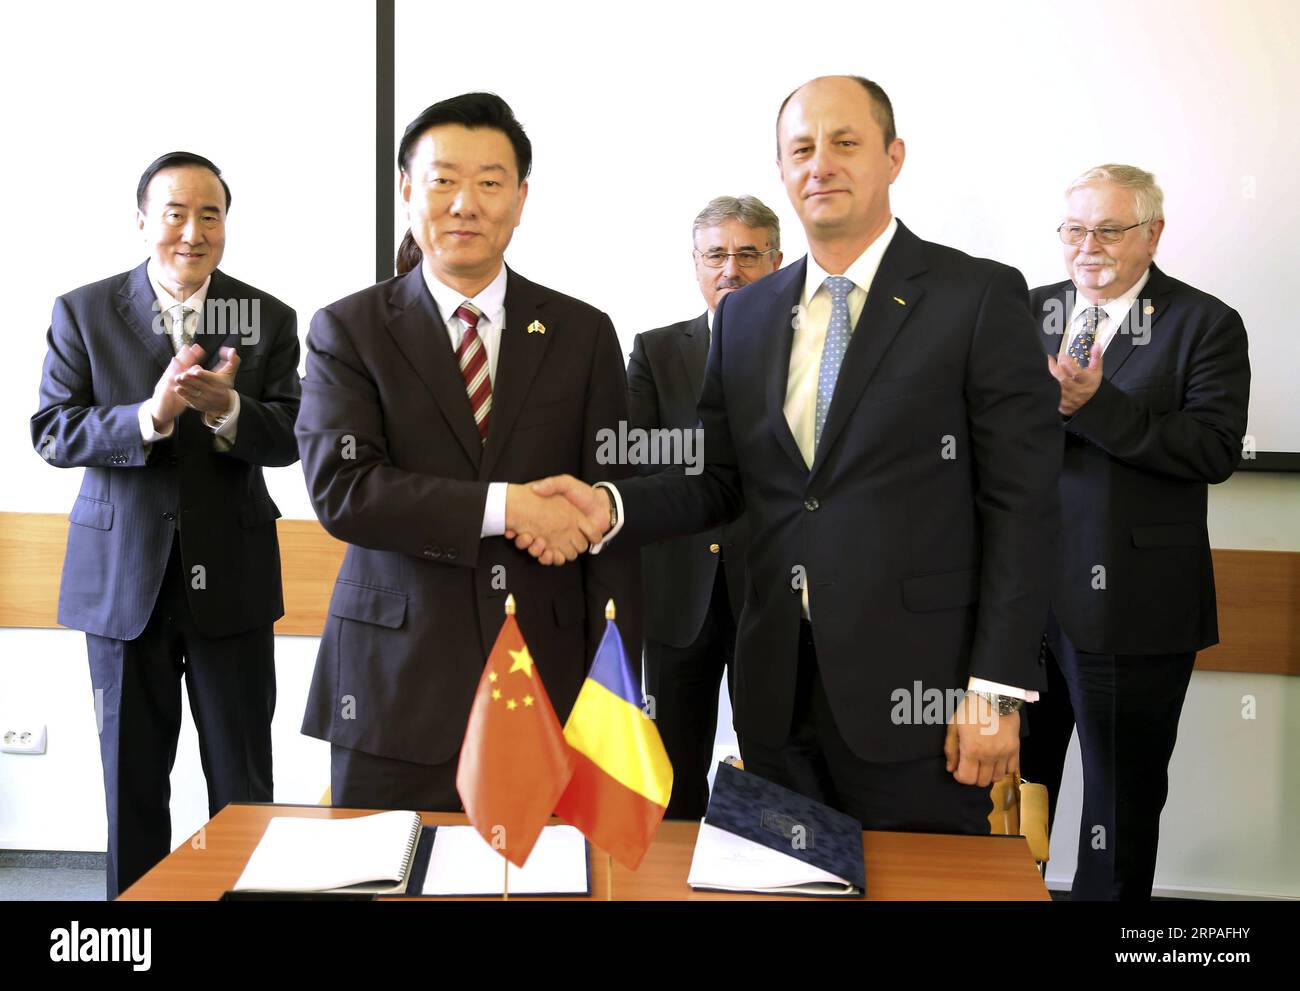 News Bilder des Tages Bukarest, Rumänien und China unterzeichnen Investorenabkommen über Fortführung des AKW Cernavoda (190508) -- BUCHAREST, May 8, 2019 (Xinhua) -- Bian Shuming(L front), general manager of the China General Nuclear Power Corporation (CGN) Romania Nuclear Power Company, shakes hands with Robert Tudorache, state secretary with the Romania Ministry of Energy, after signing an agreement in Bucharest, Romania, May 8, 2019. Romanian and Chinese companies signed on Wednesday the Investors Agreement in the preliminary form (PIA) regarding the continuation of the Cernavoda nuclear po Stock Photo